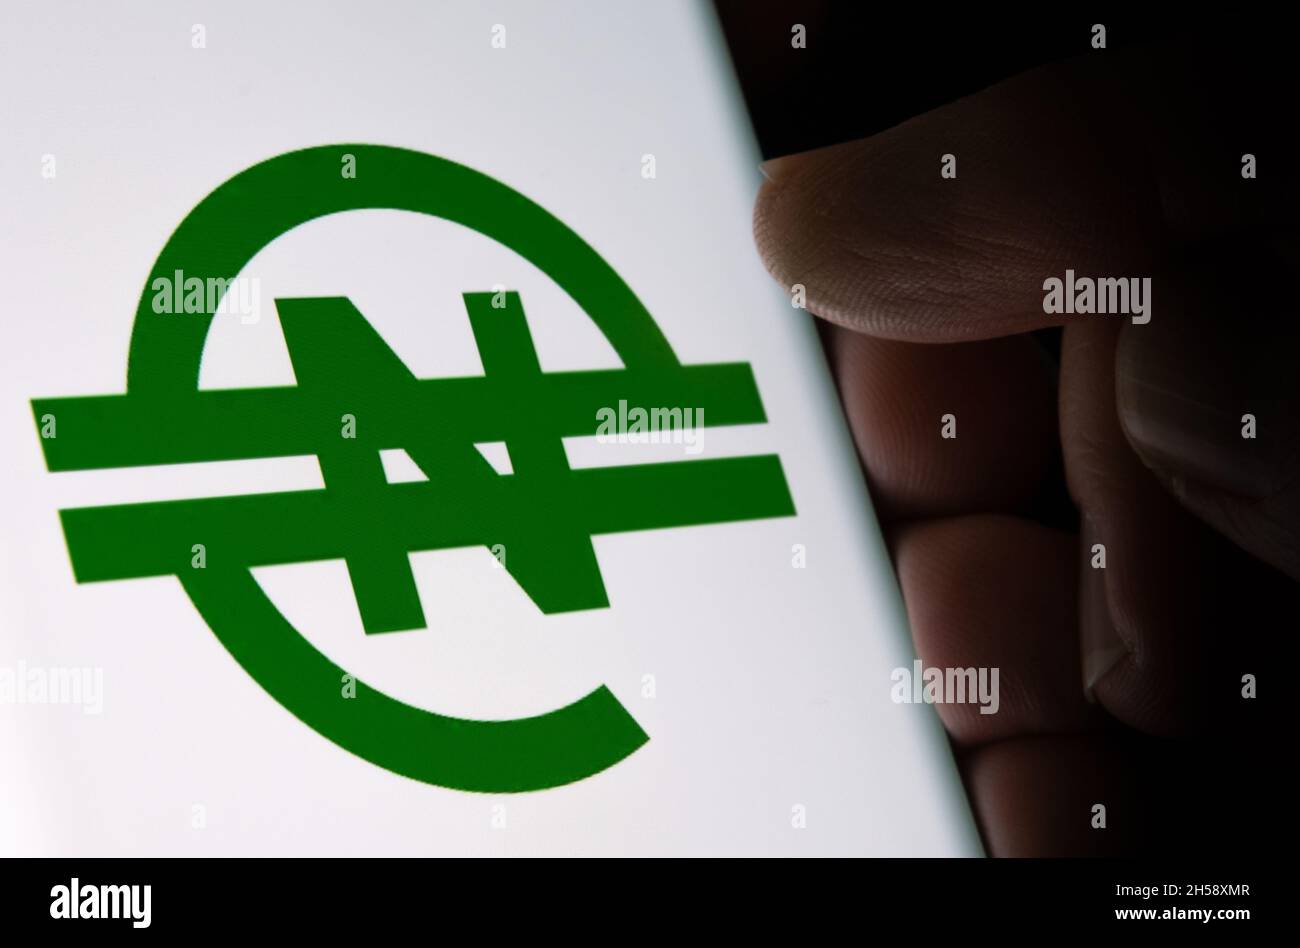 eNaira currency logo seen on glowing screen and finger touching it. Africa’s first digital currency. Stafford, United Kingdom, November 7, 2021. Stock Photo